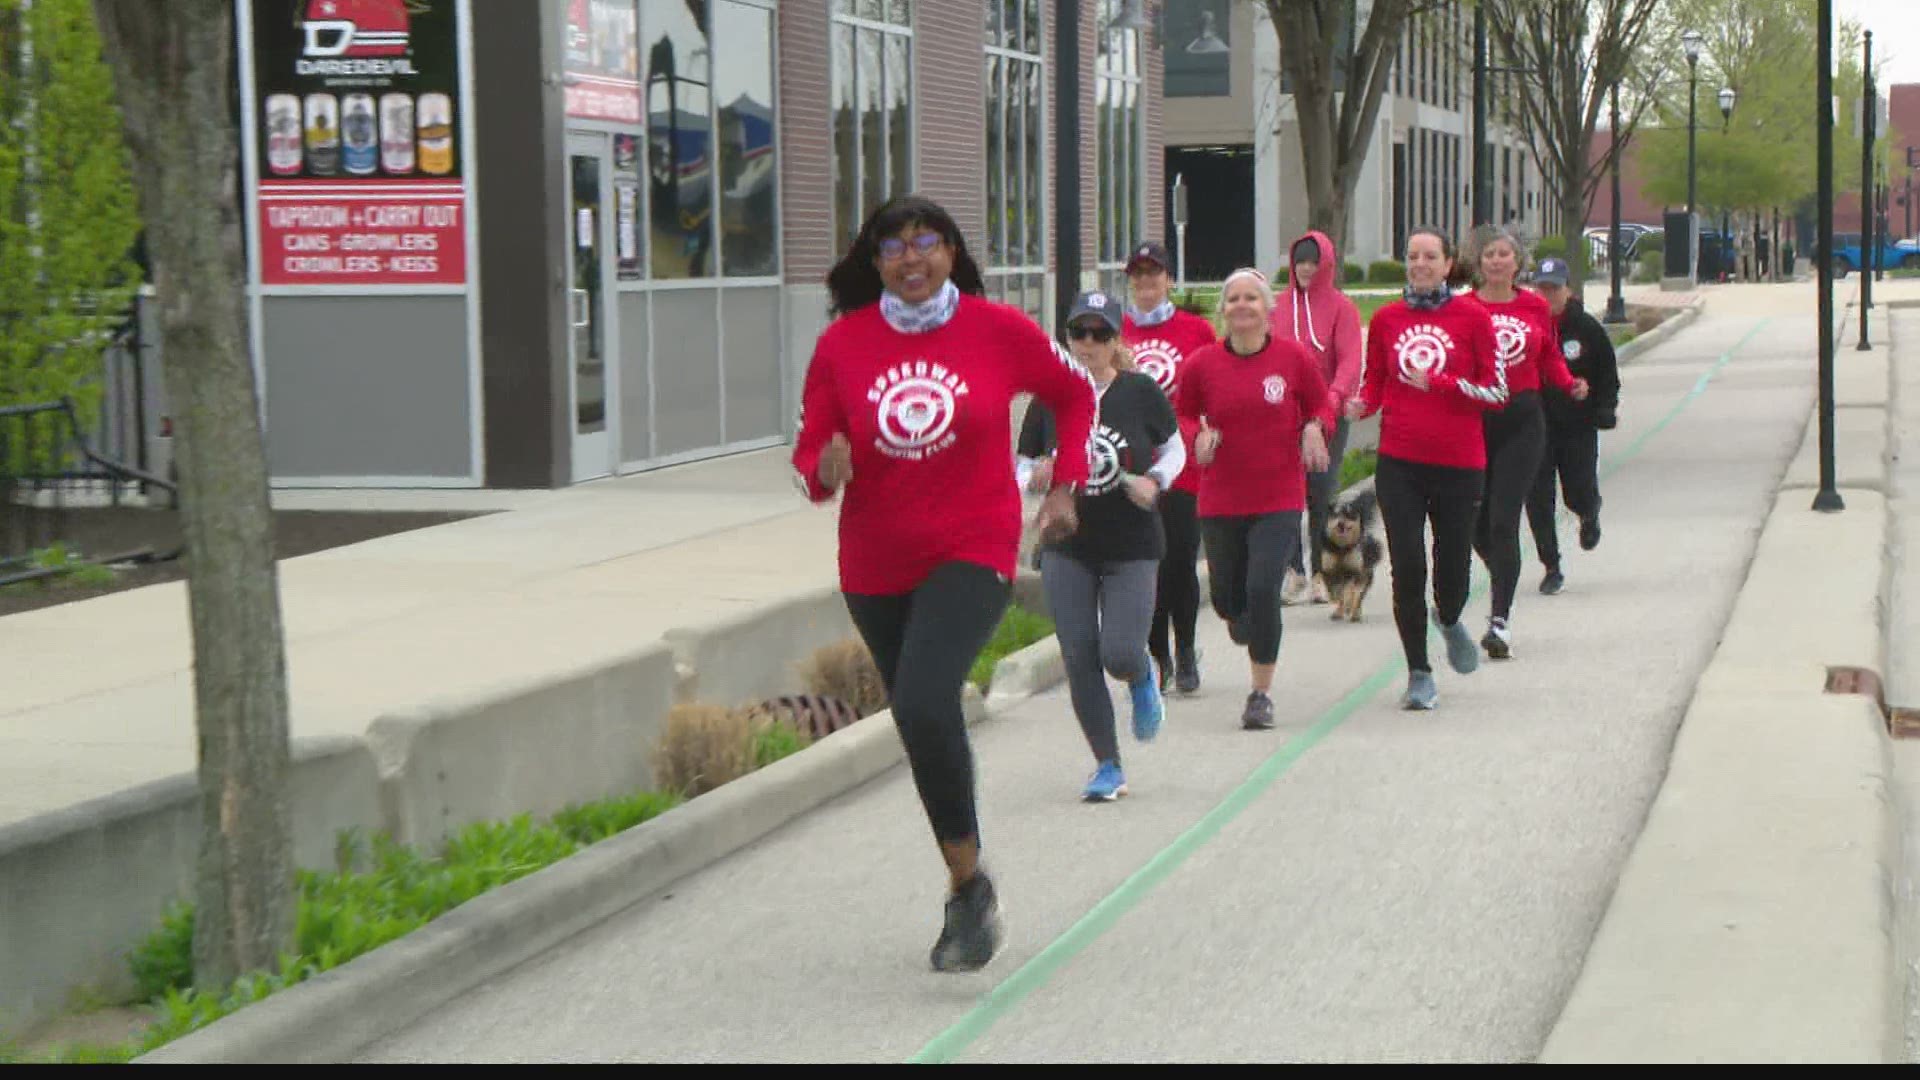 The Speedway Chamber of Commerce was looking for a way to encourage the people of Speedway to lead healthier, more active lifestyles, so the running club was born.